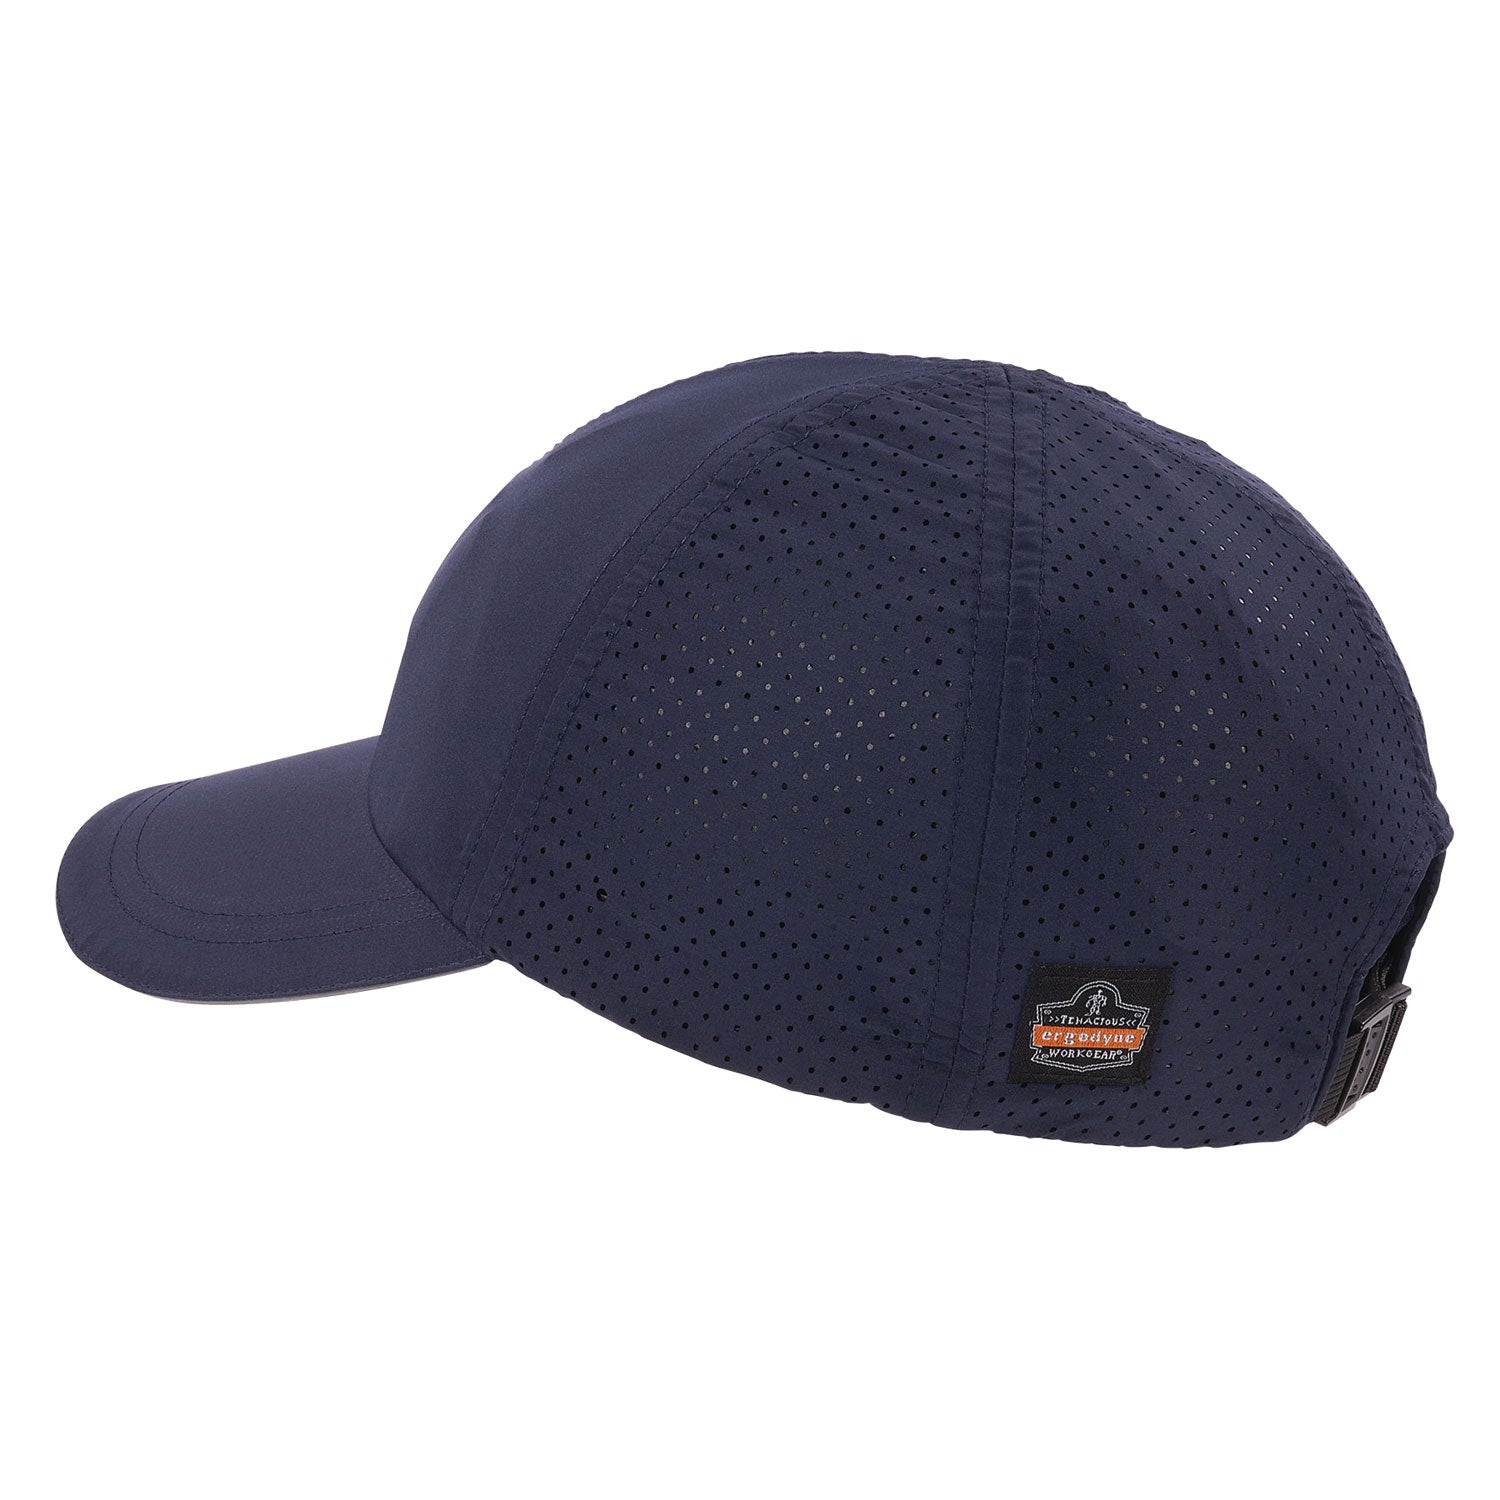 skullerz-8947-lightweight-baseball-hat-and-bump-cap-insert-x-large-2x-large-navy-ships-in-1-3-business-days_ego23455 - 2